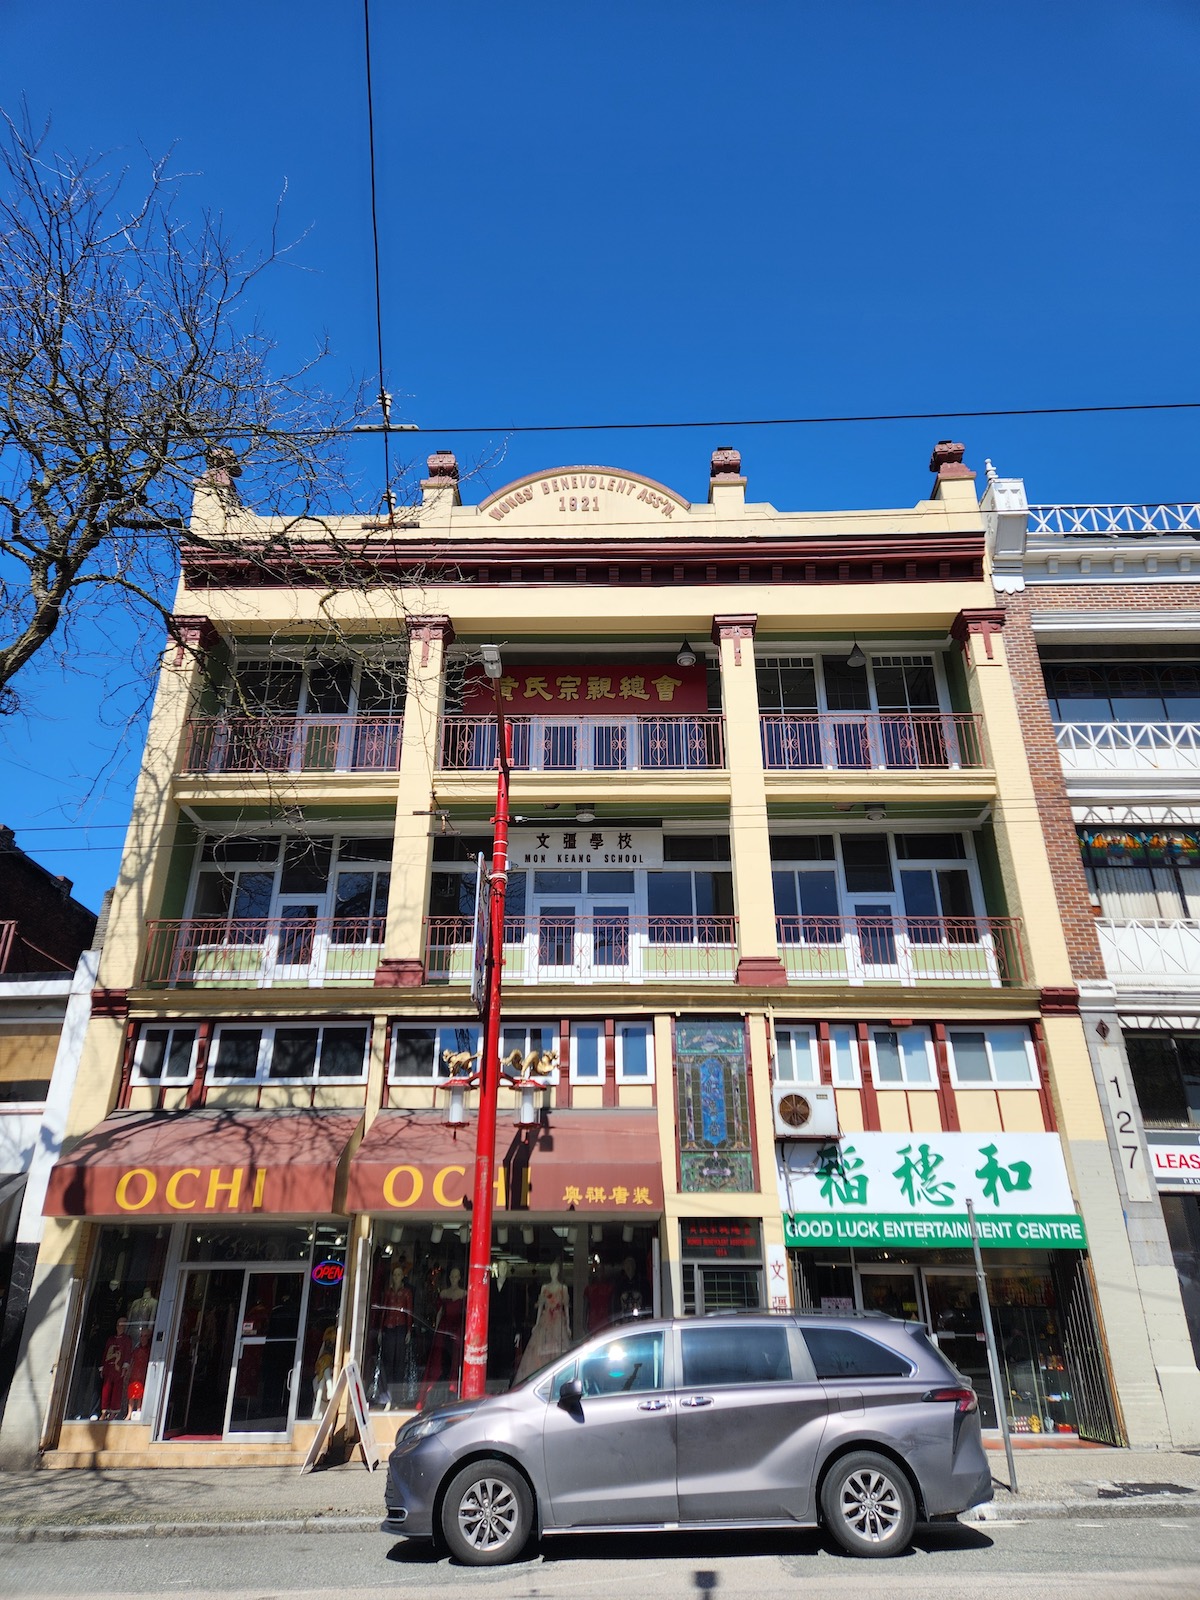 The exterior of the Wongs’ Benevolent Association building in Vancouver’s Chinatown on a sunny day. It is a three-storey building with beige trim.